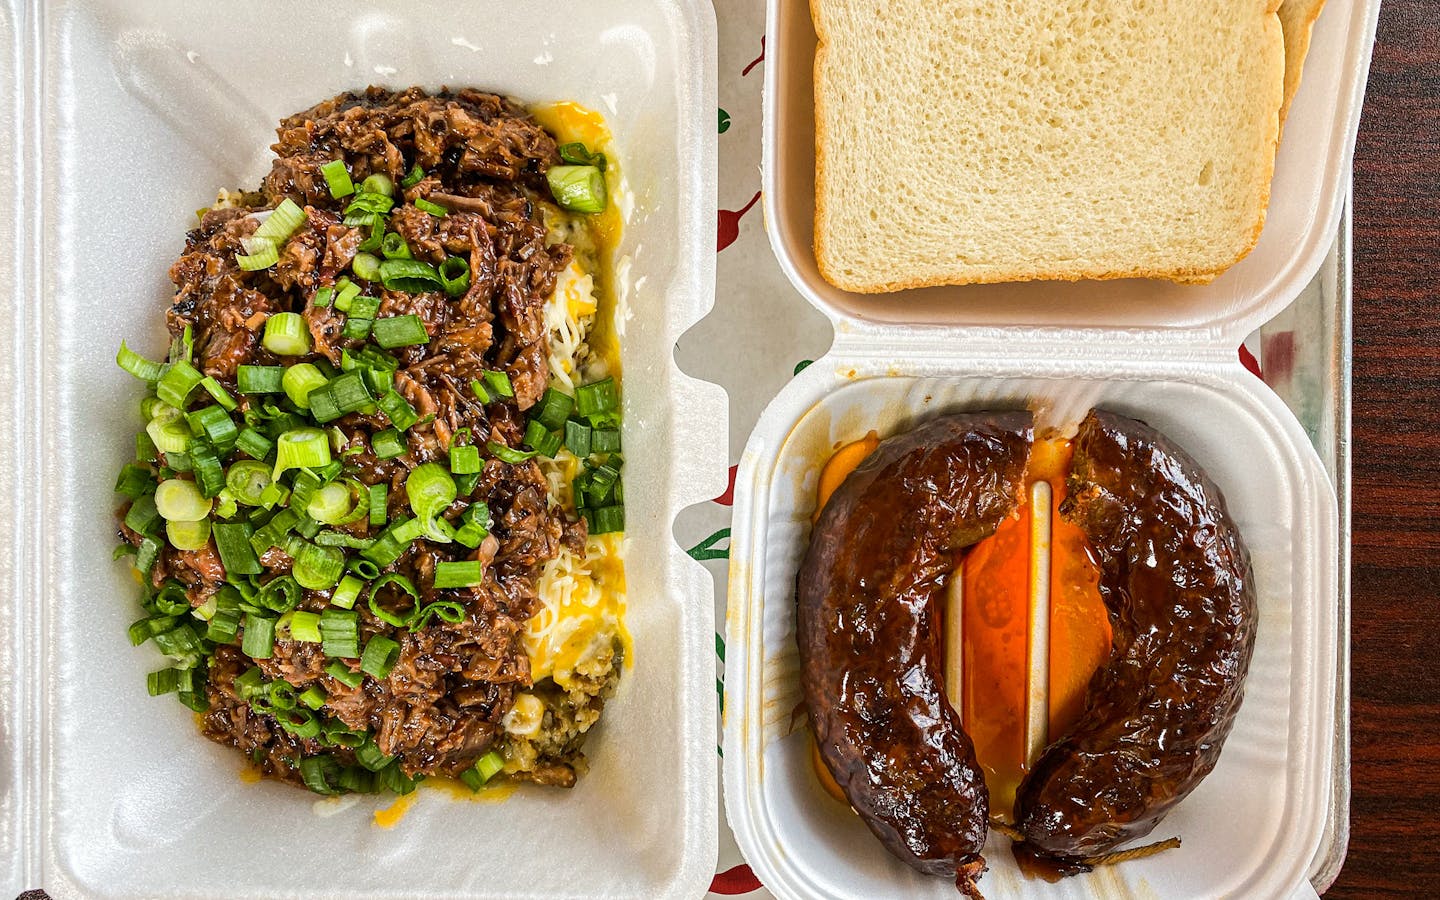 https://img.texasmonthly.com/2023/05/Guillorys-Bar-B-Que-Houston-loaded-Boudin-bbq-1.jpg?auto=compress&crop=faces&fit=crop&fm=jpg&h=900&ixlib=php-3.3.1&q=45&w=1600